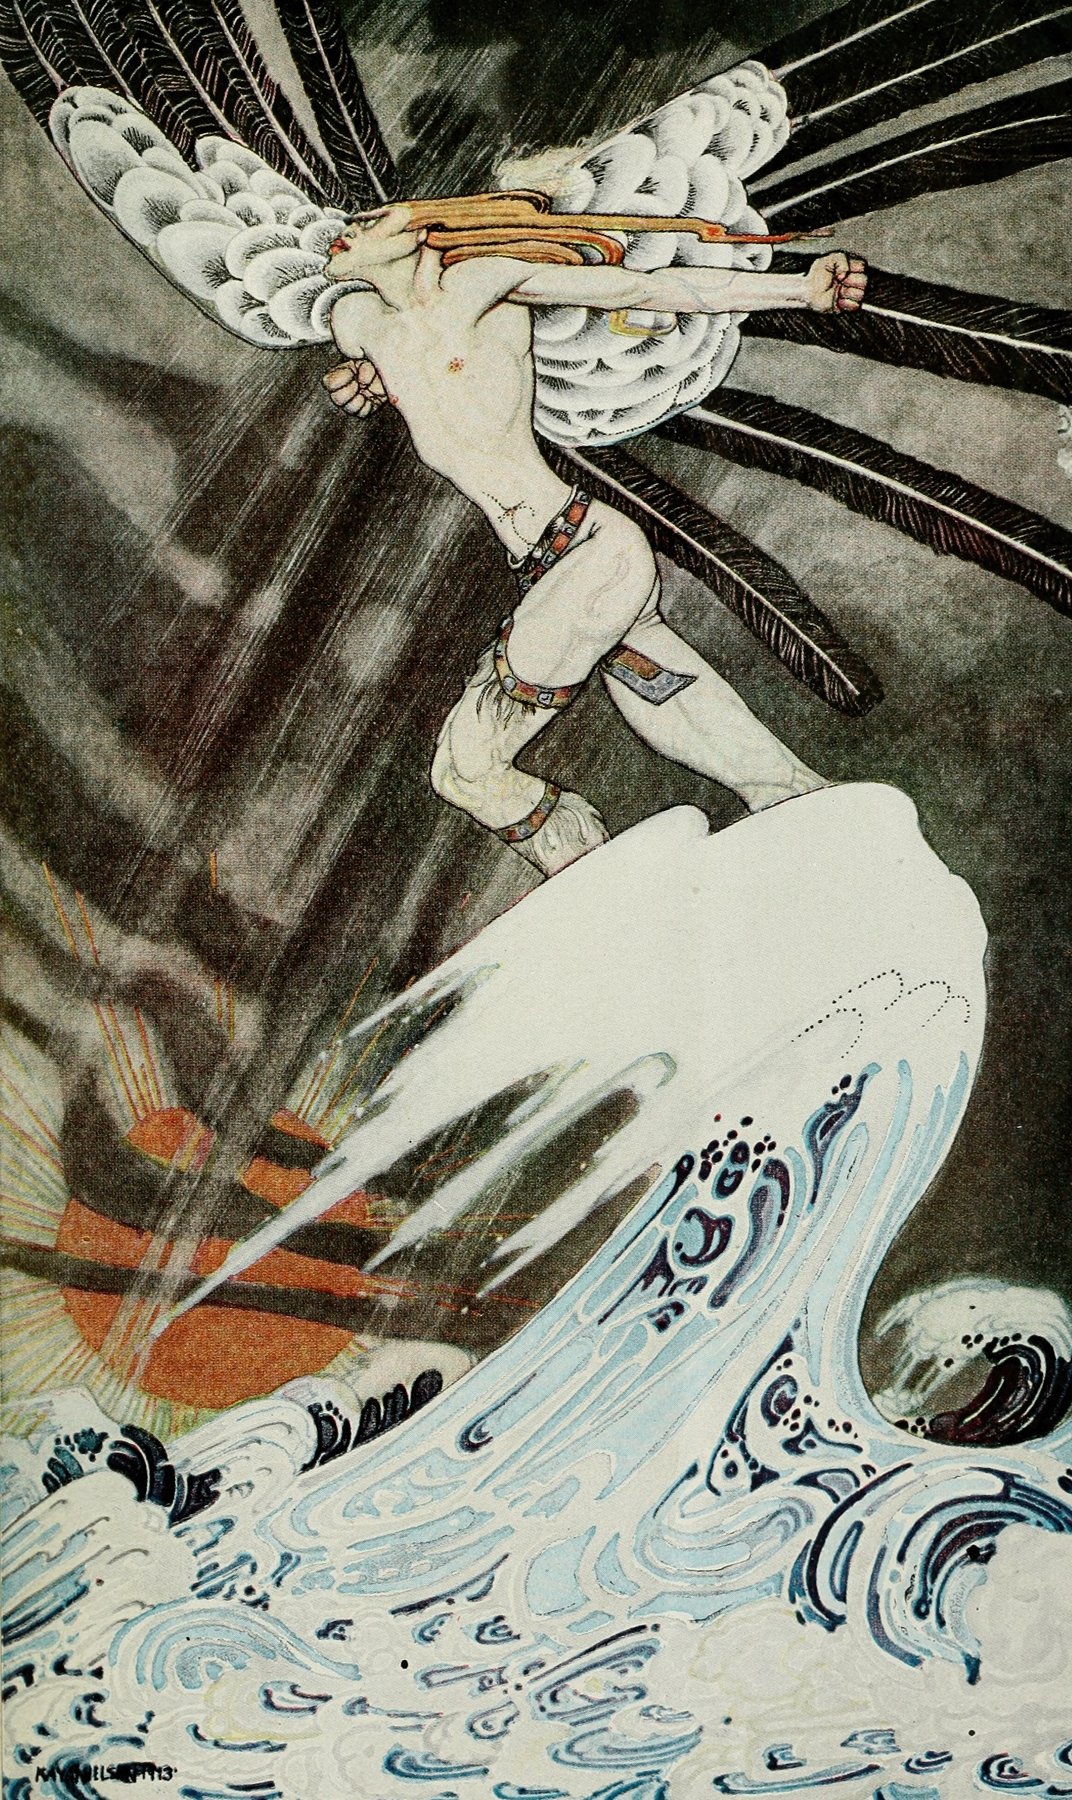 East of the sun and west of the moon pl 05 (1922)